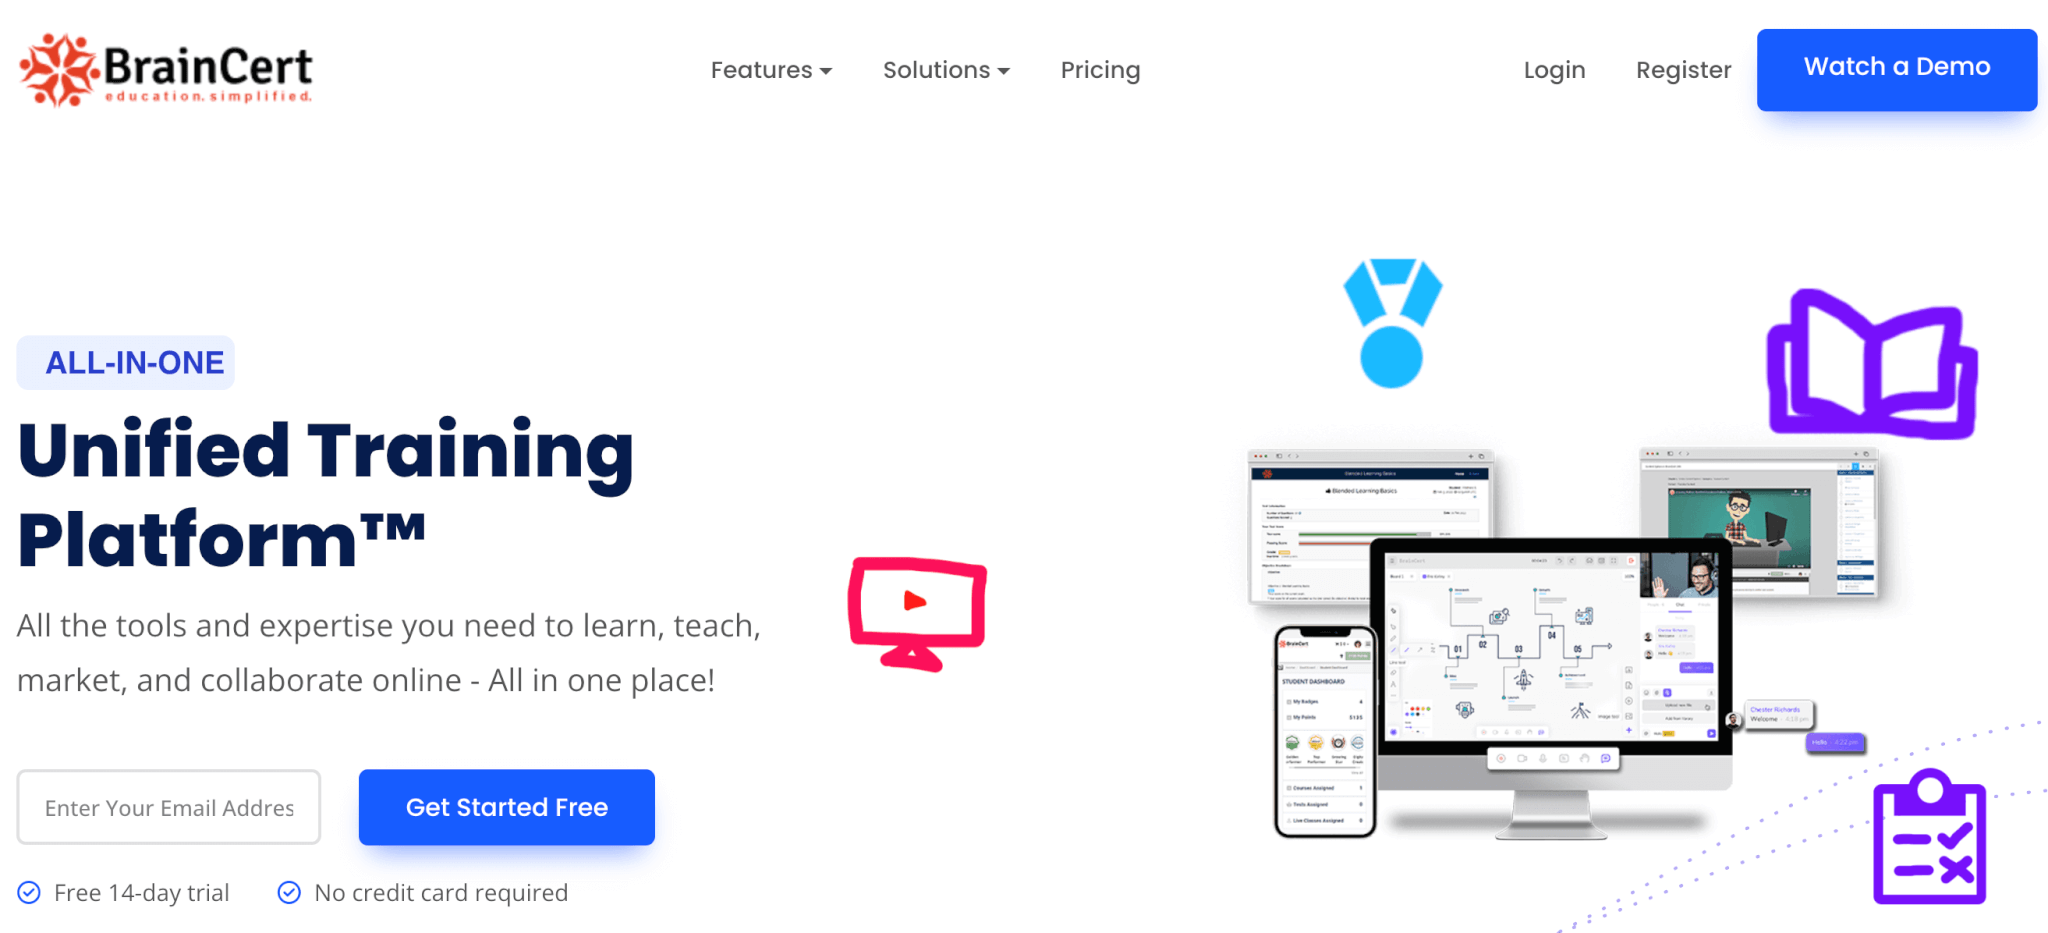 an image of BrainCert's landing page showing several devices in white background